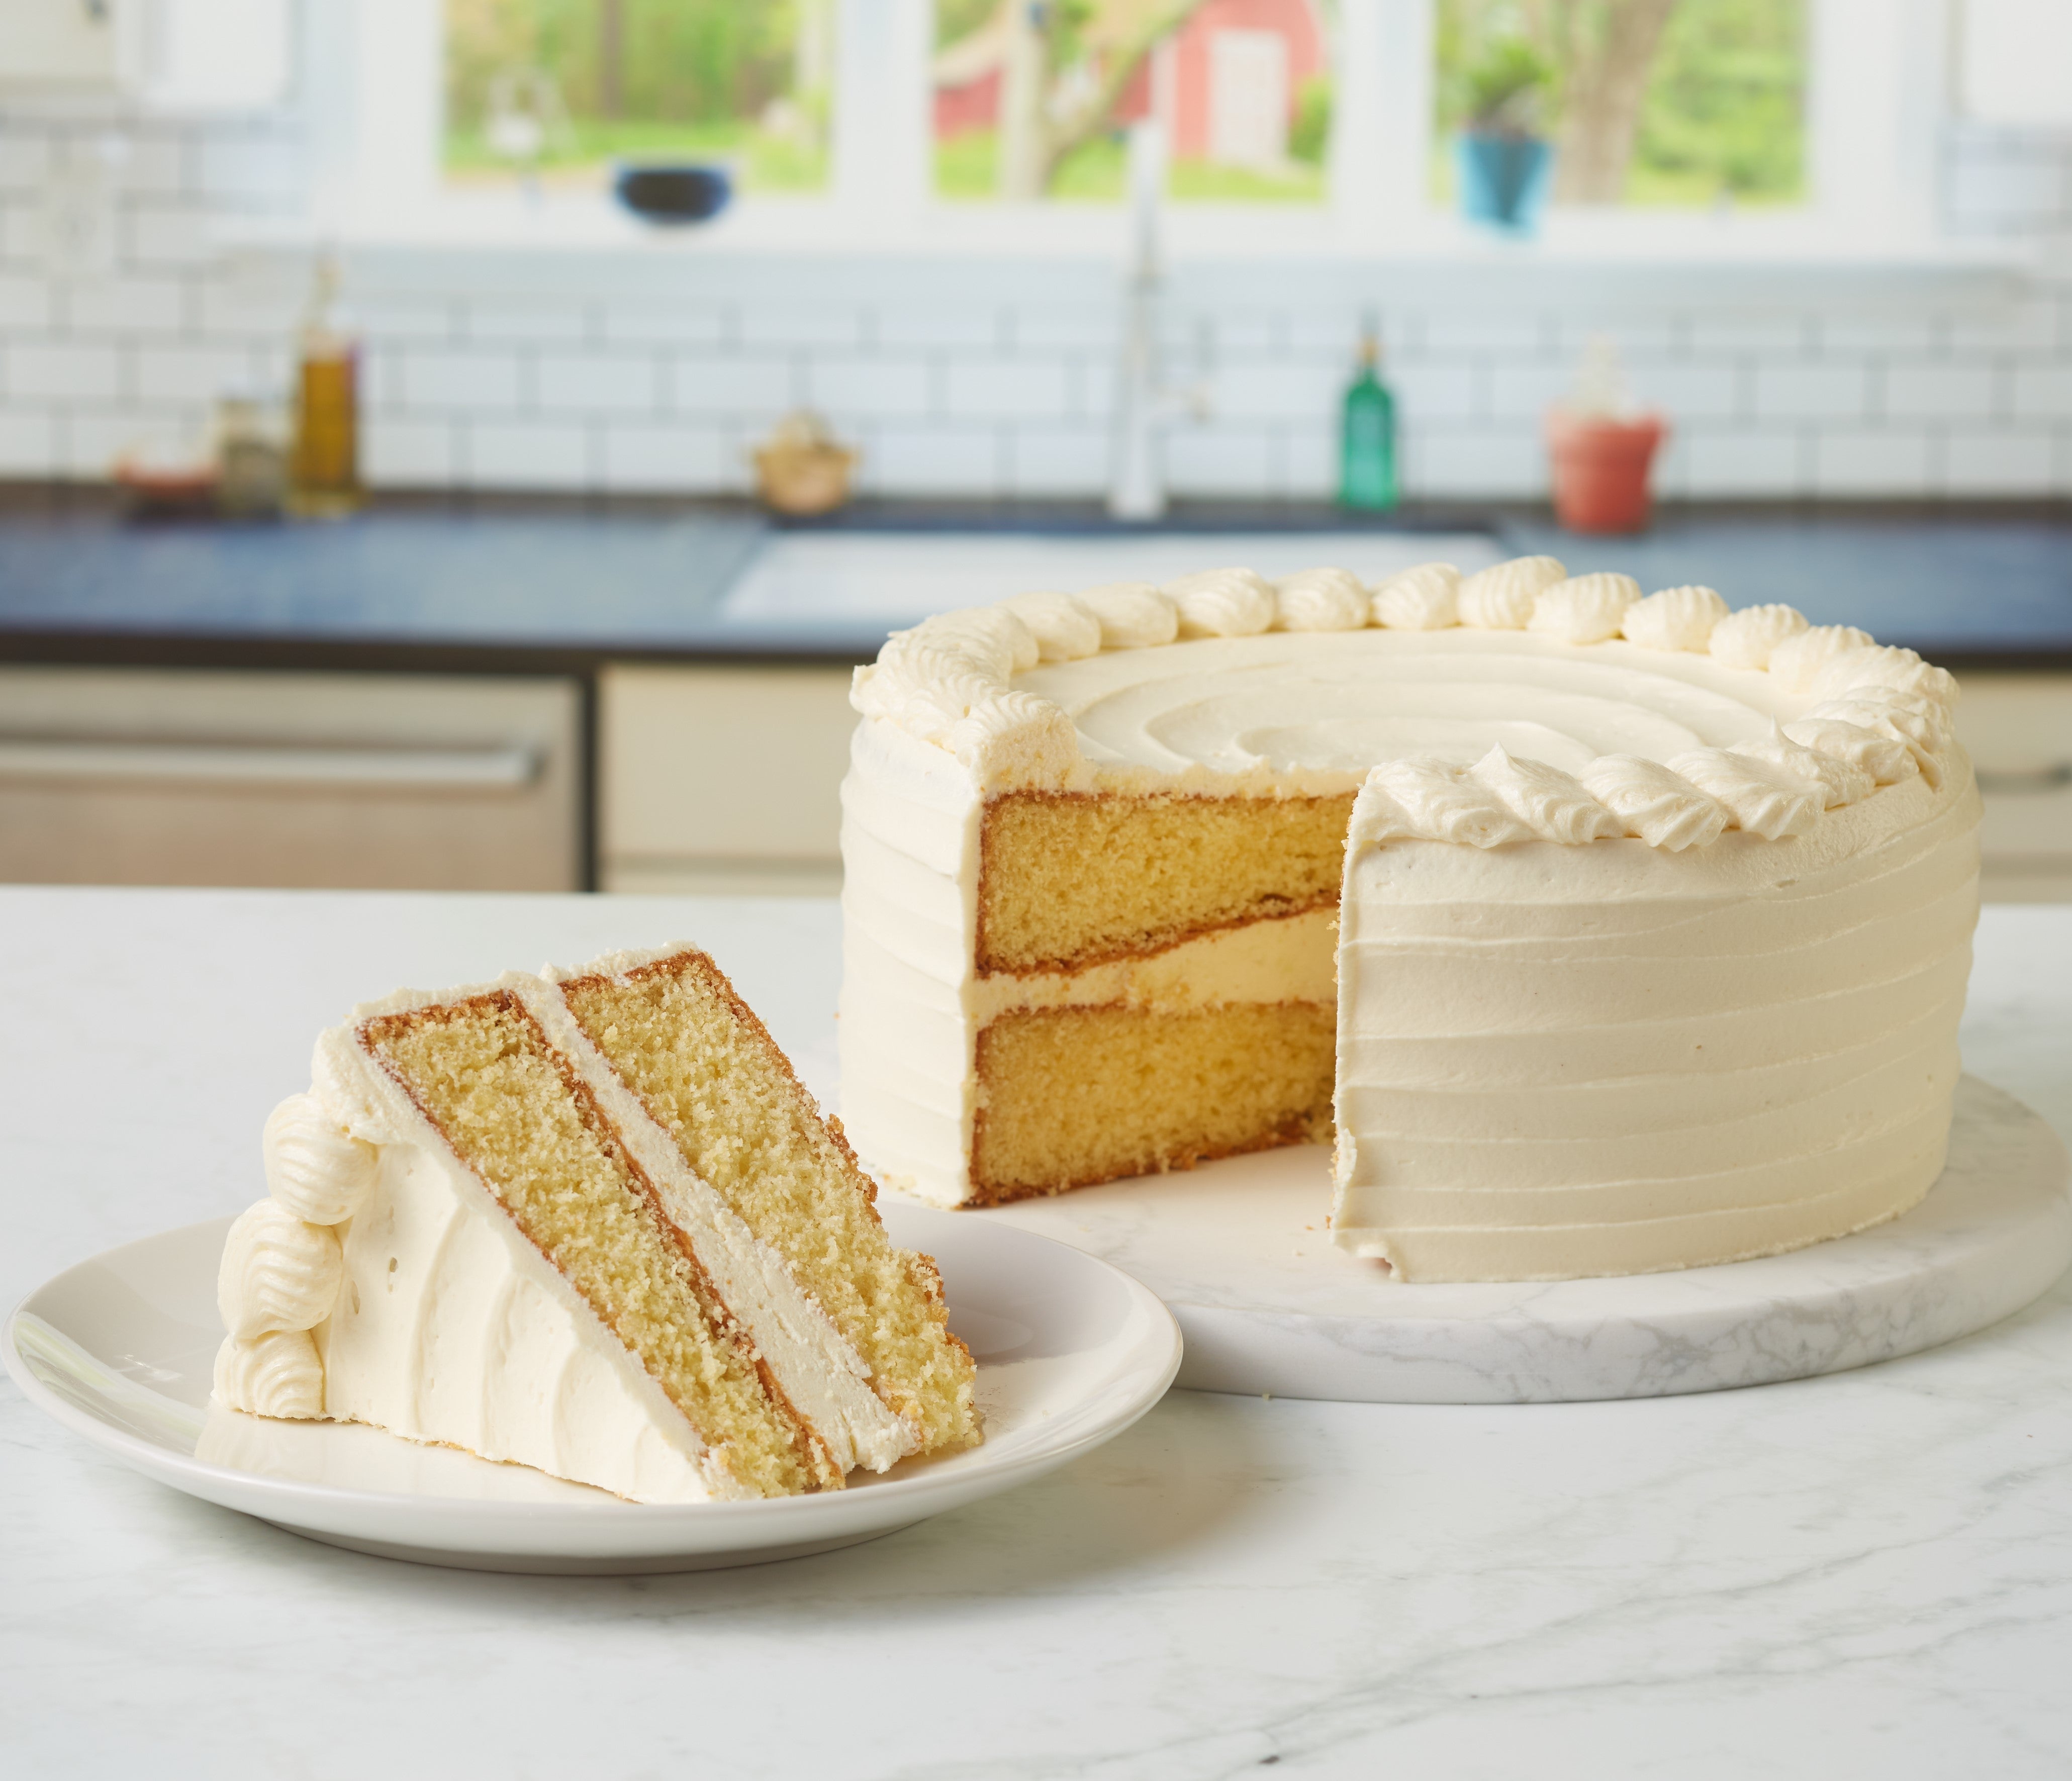 Image of a slice of yellow cake with vanilla frosting, with the full cake in the background.